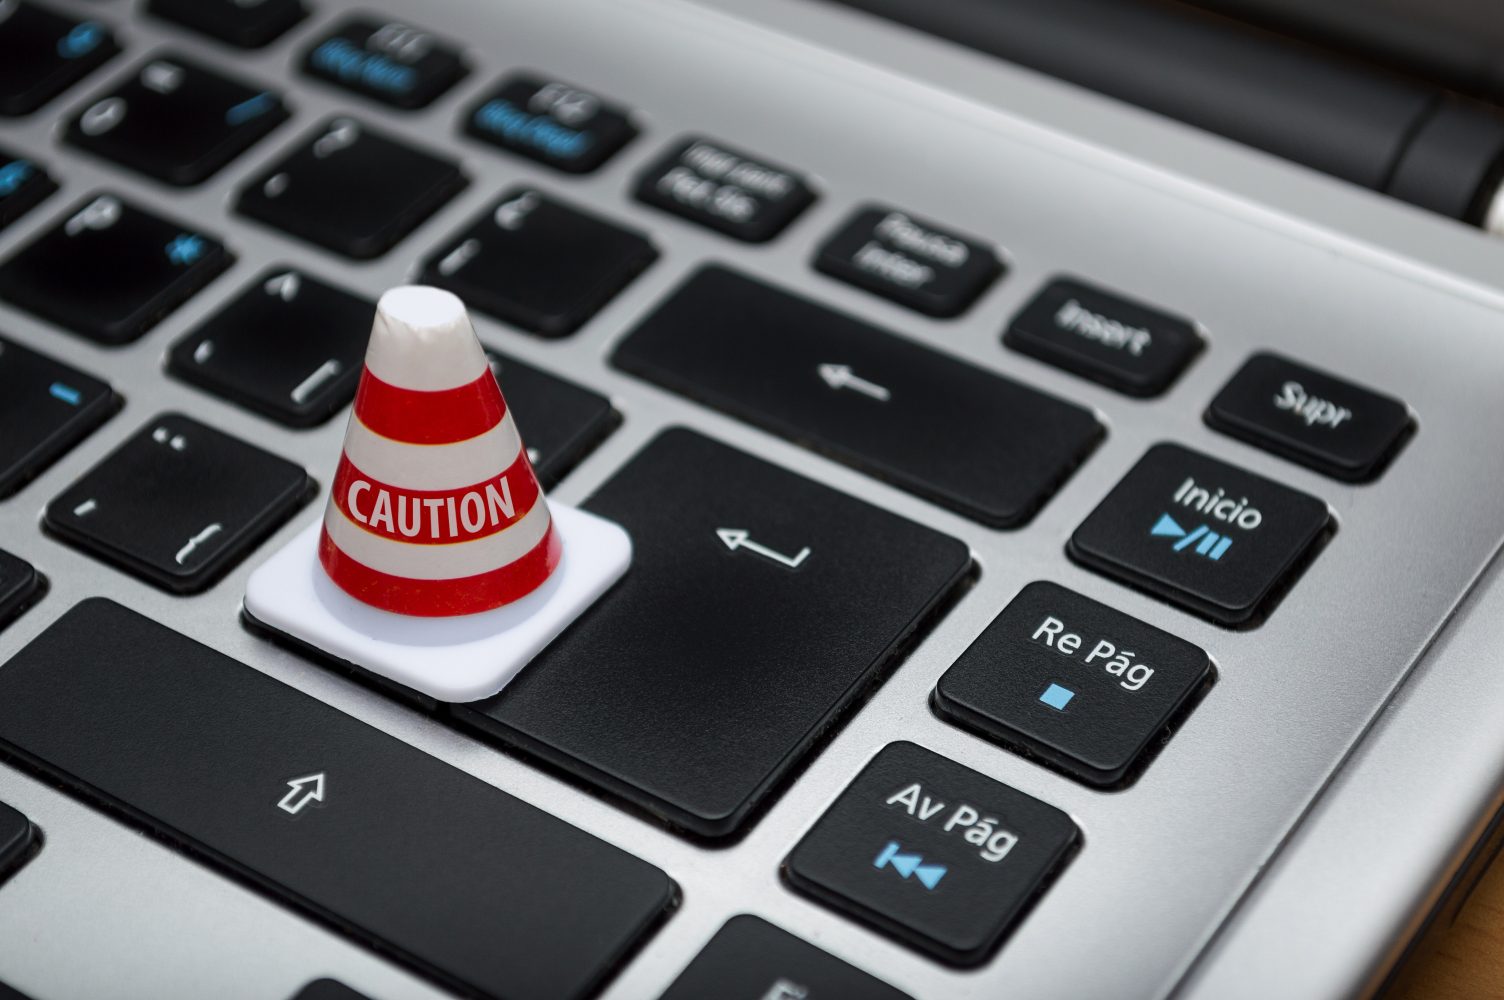 Laptop keyboard with a miniature traffic cone placed on the enter key reading Caution